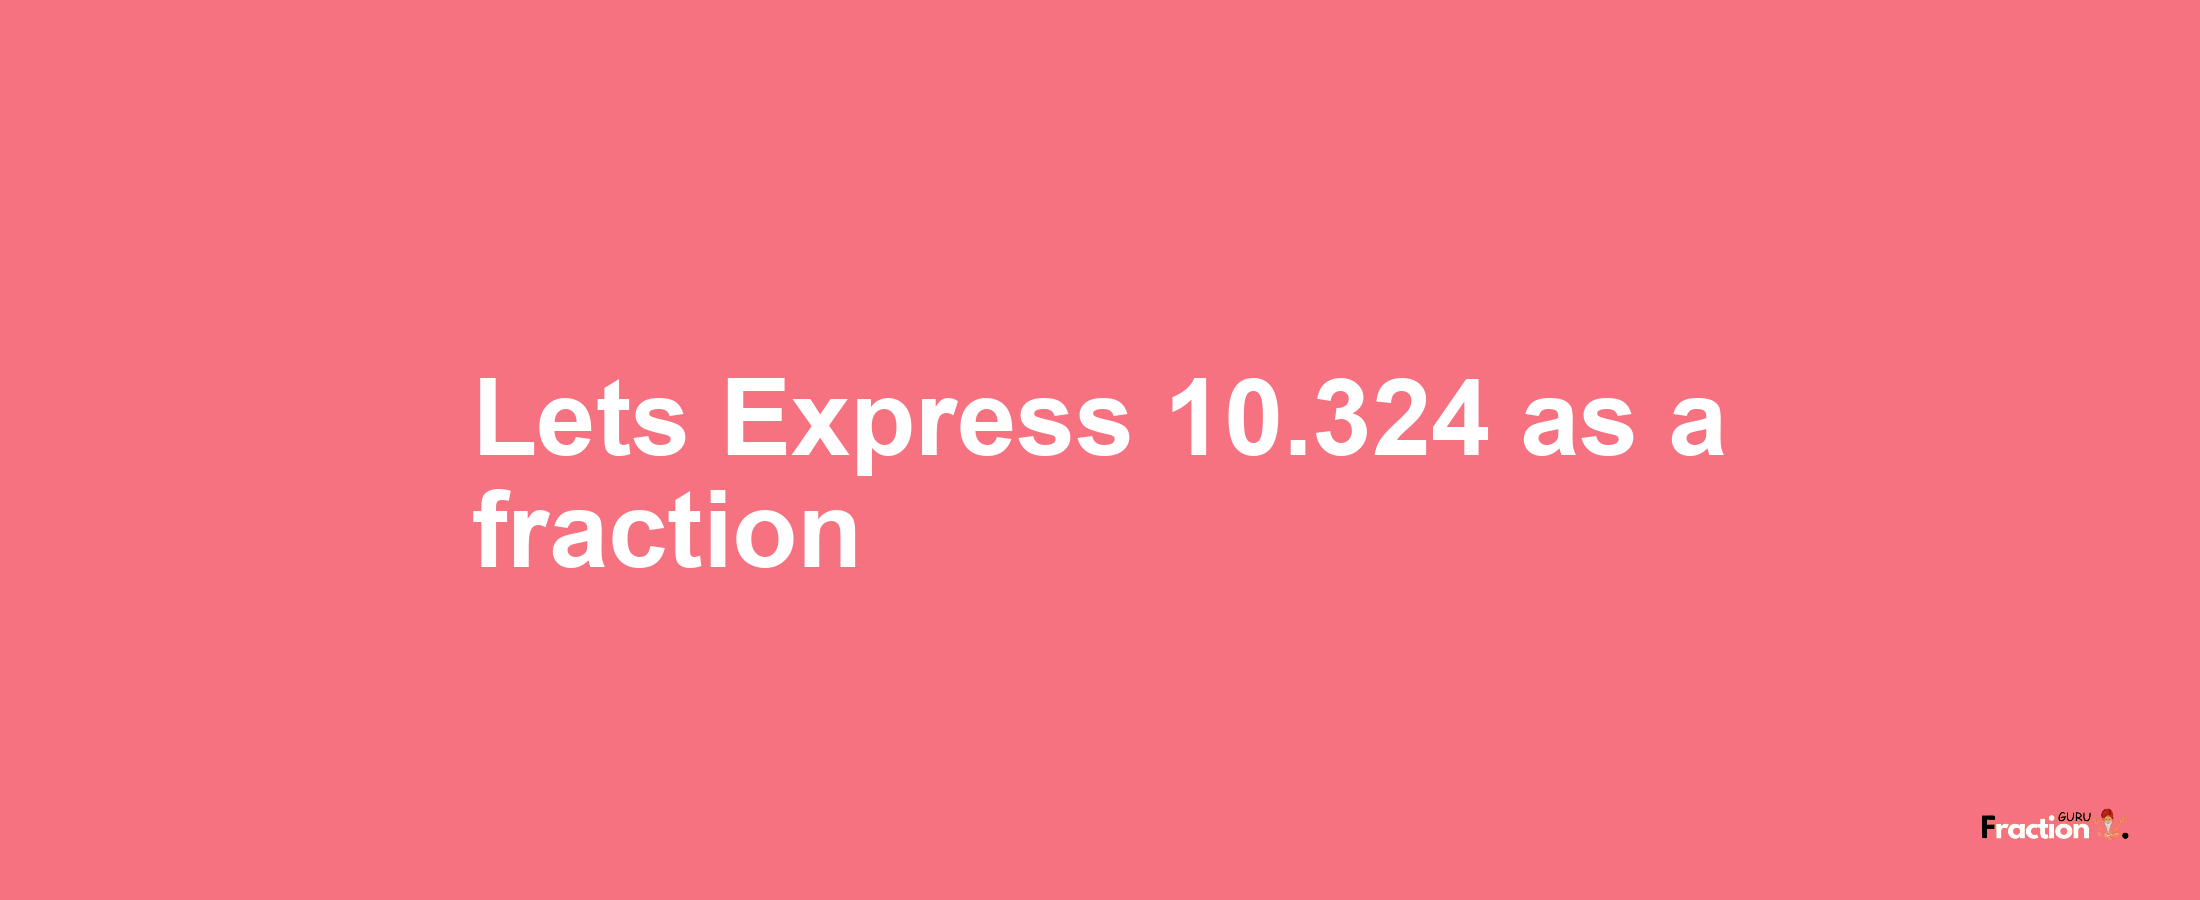 Lets Express 10.324 as afraction